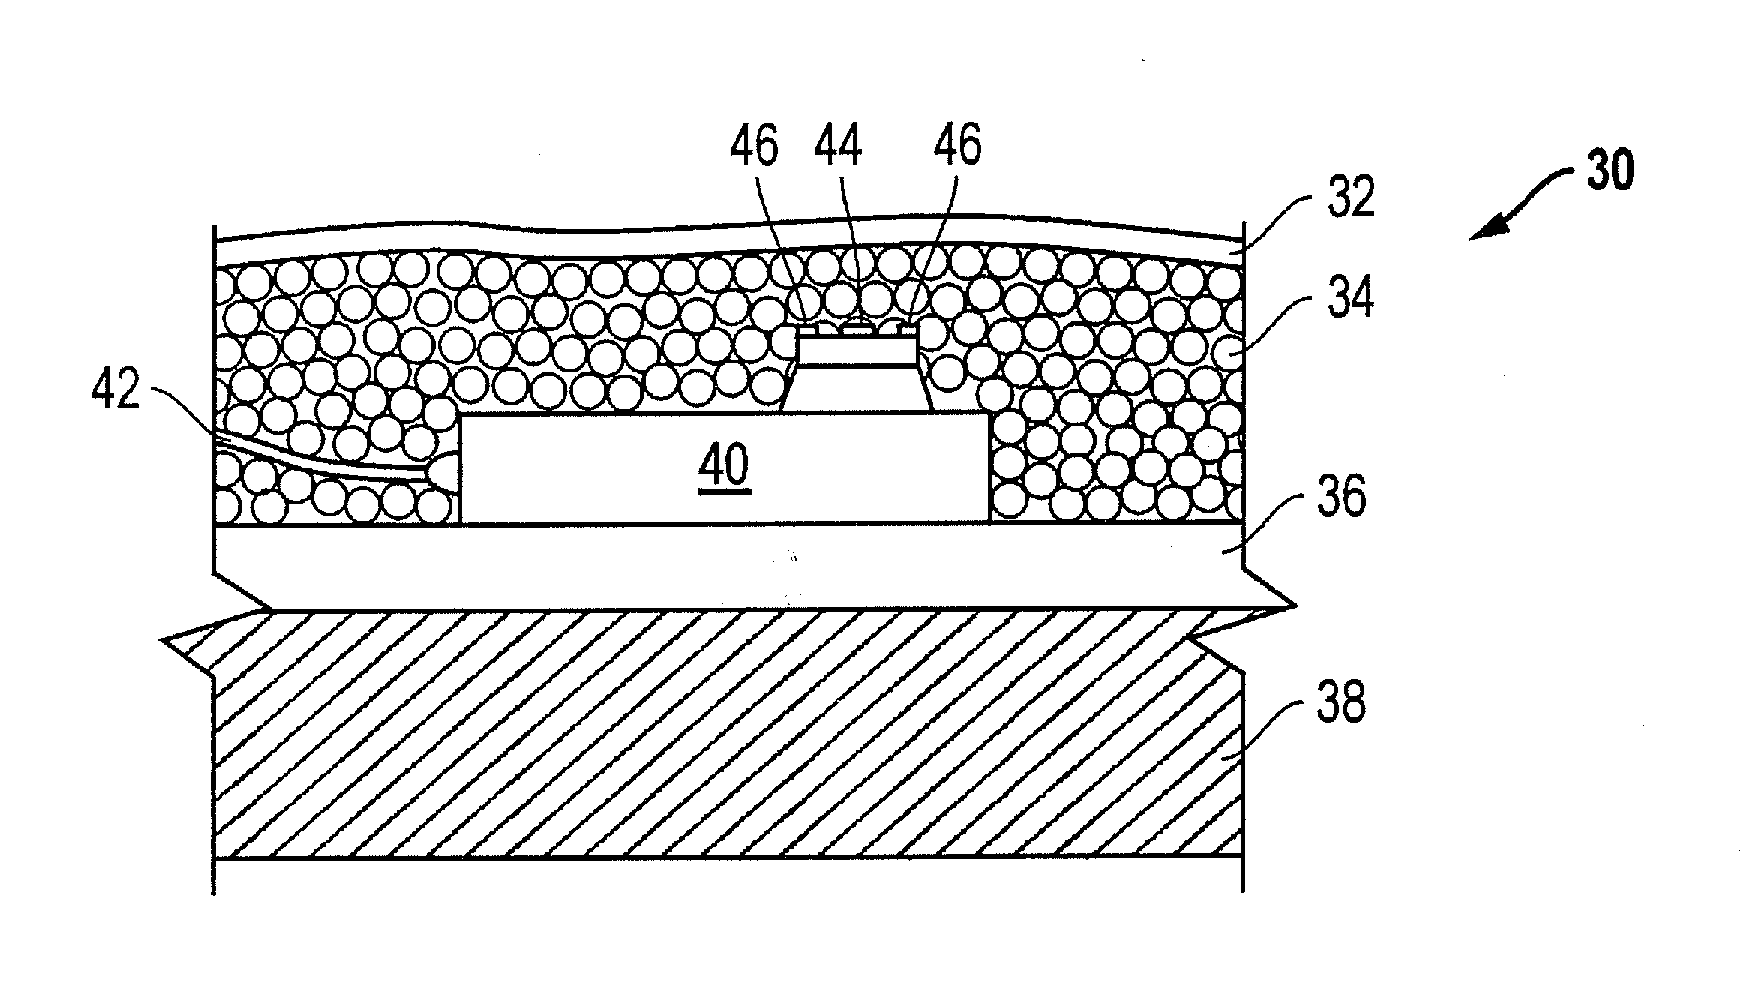 Access port indicator for implantable medical device